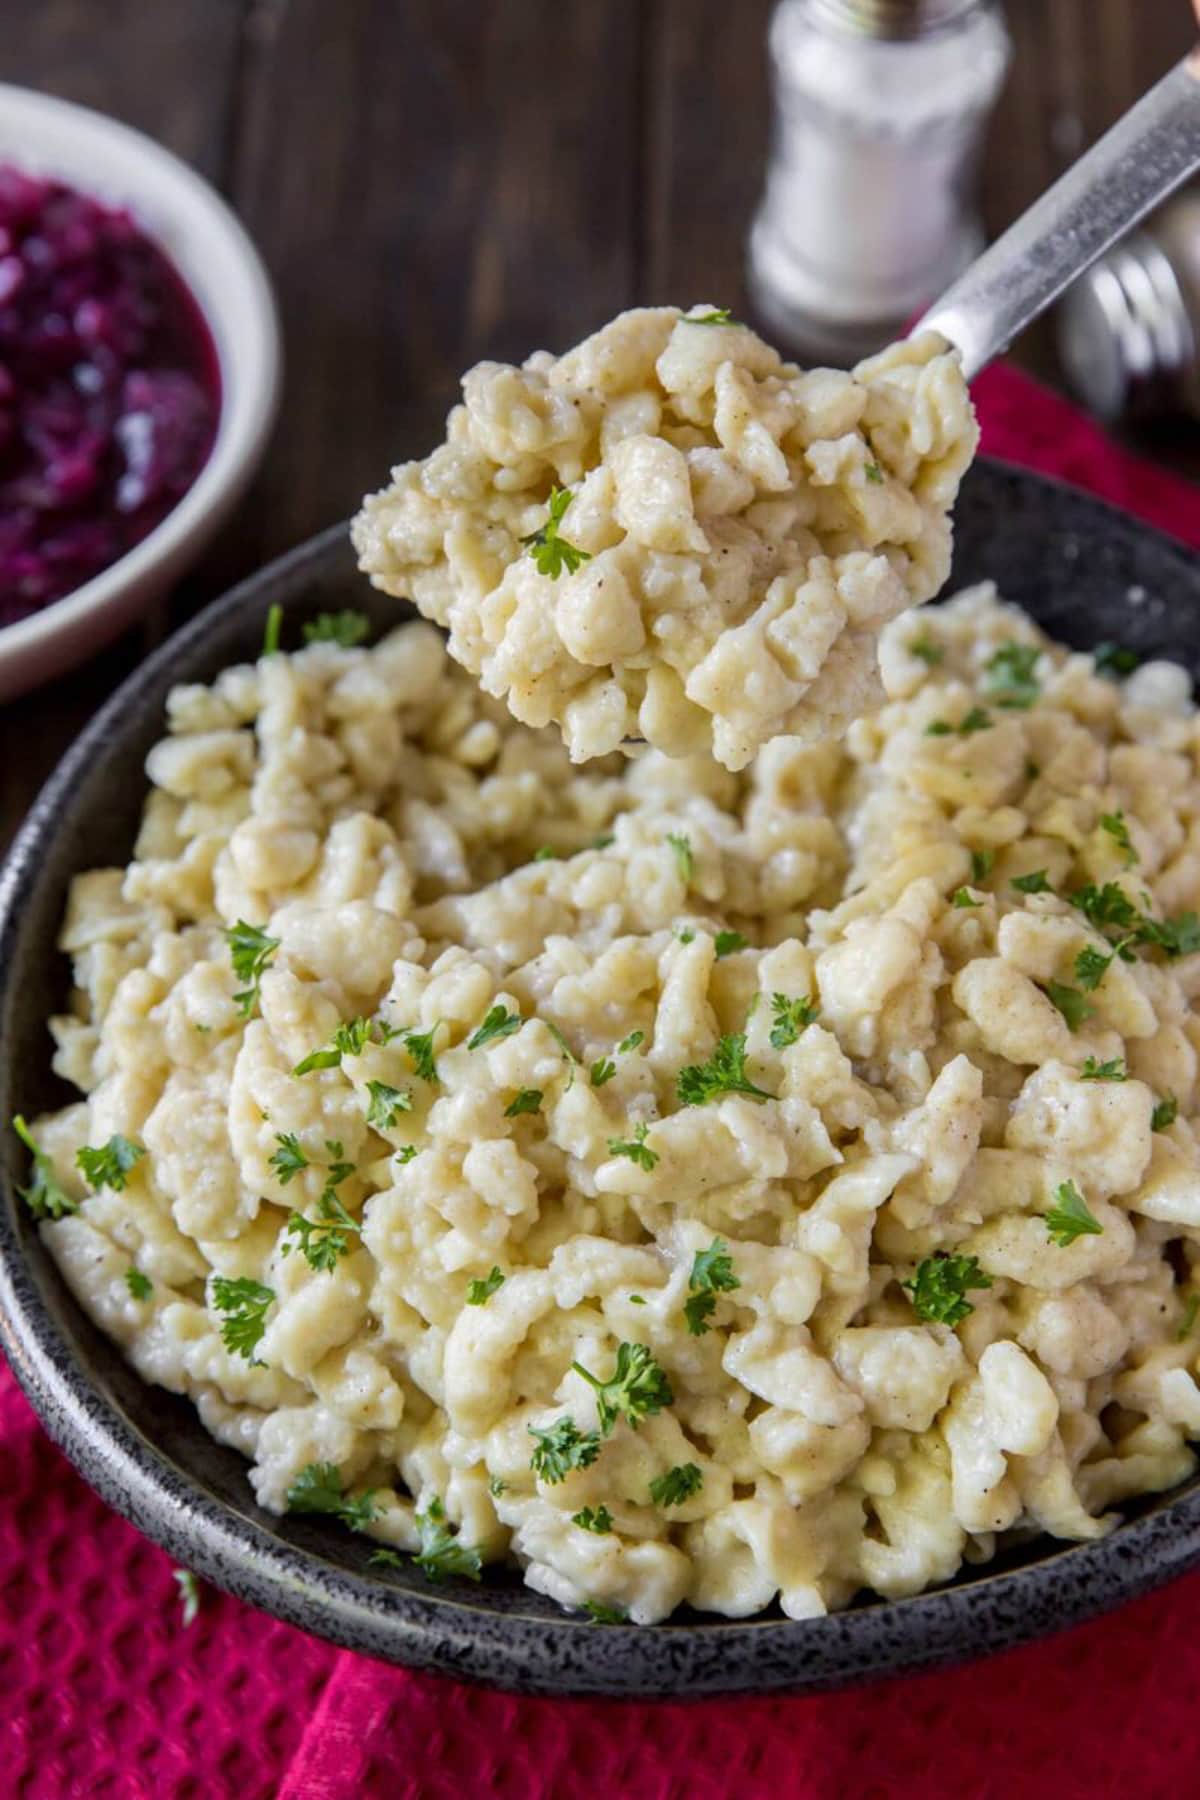 German Spaetzle in a serving dish with red cabbage in a white bowl.